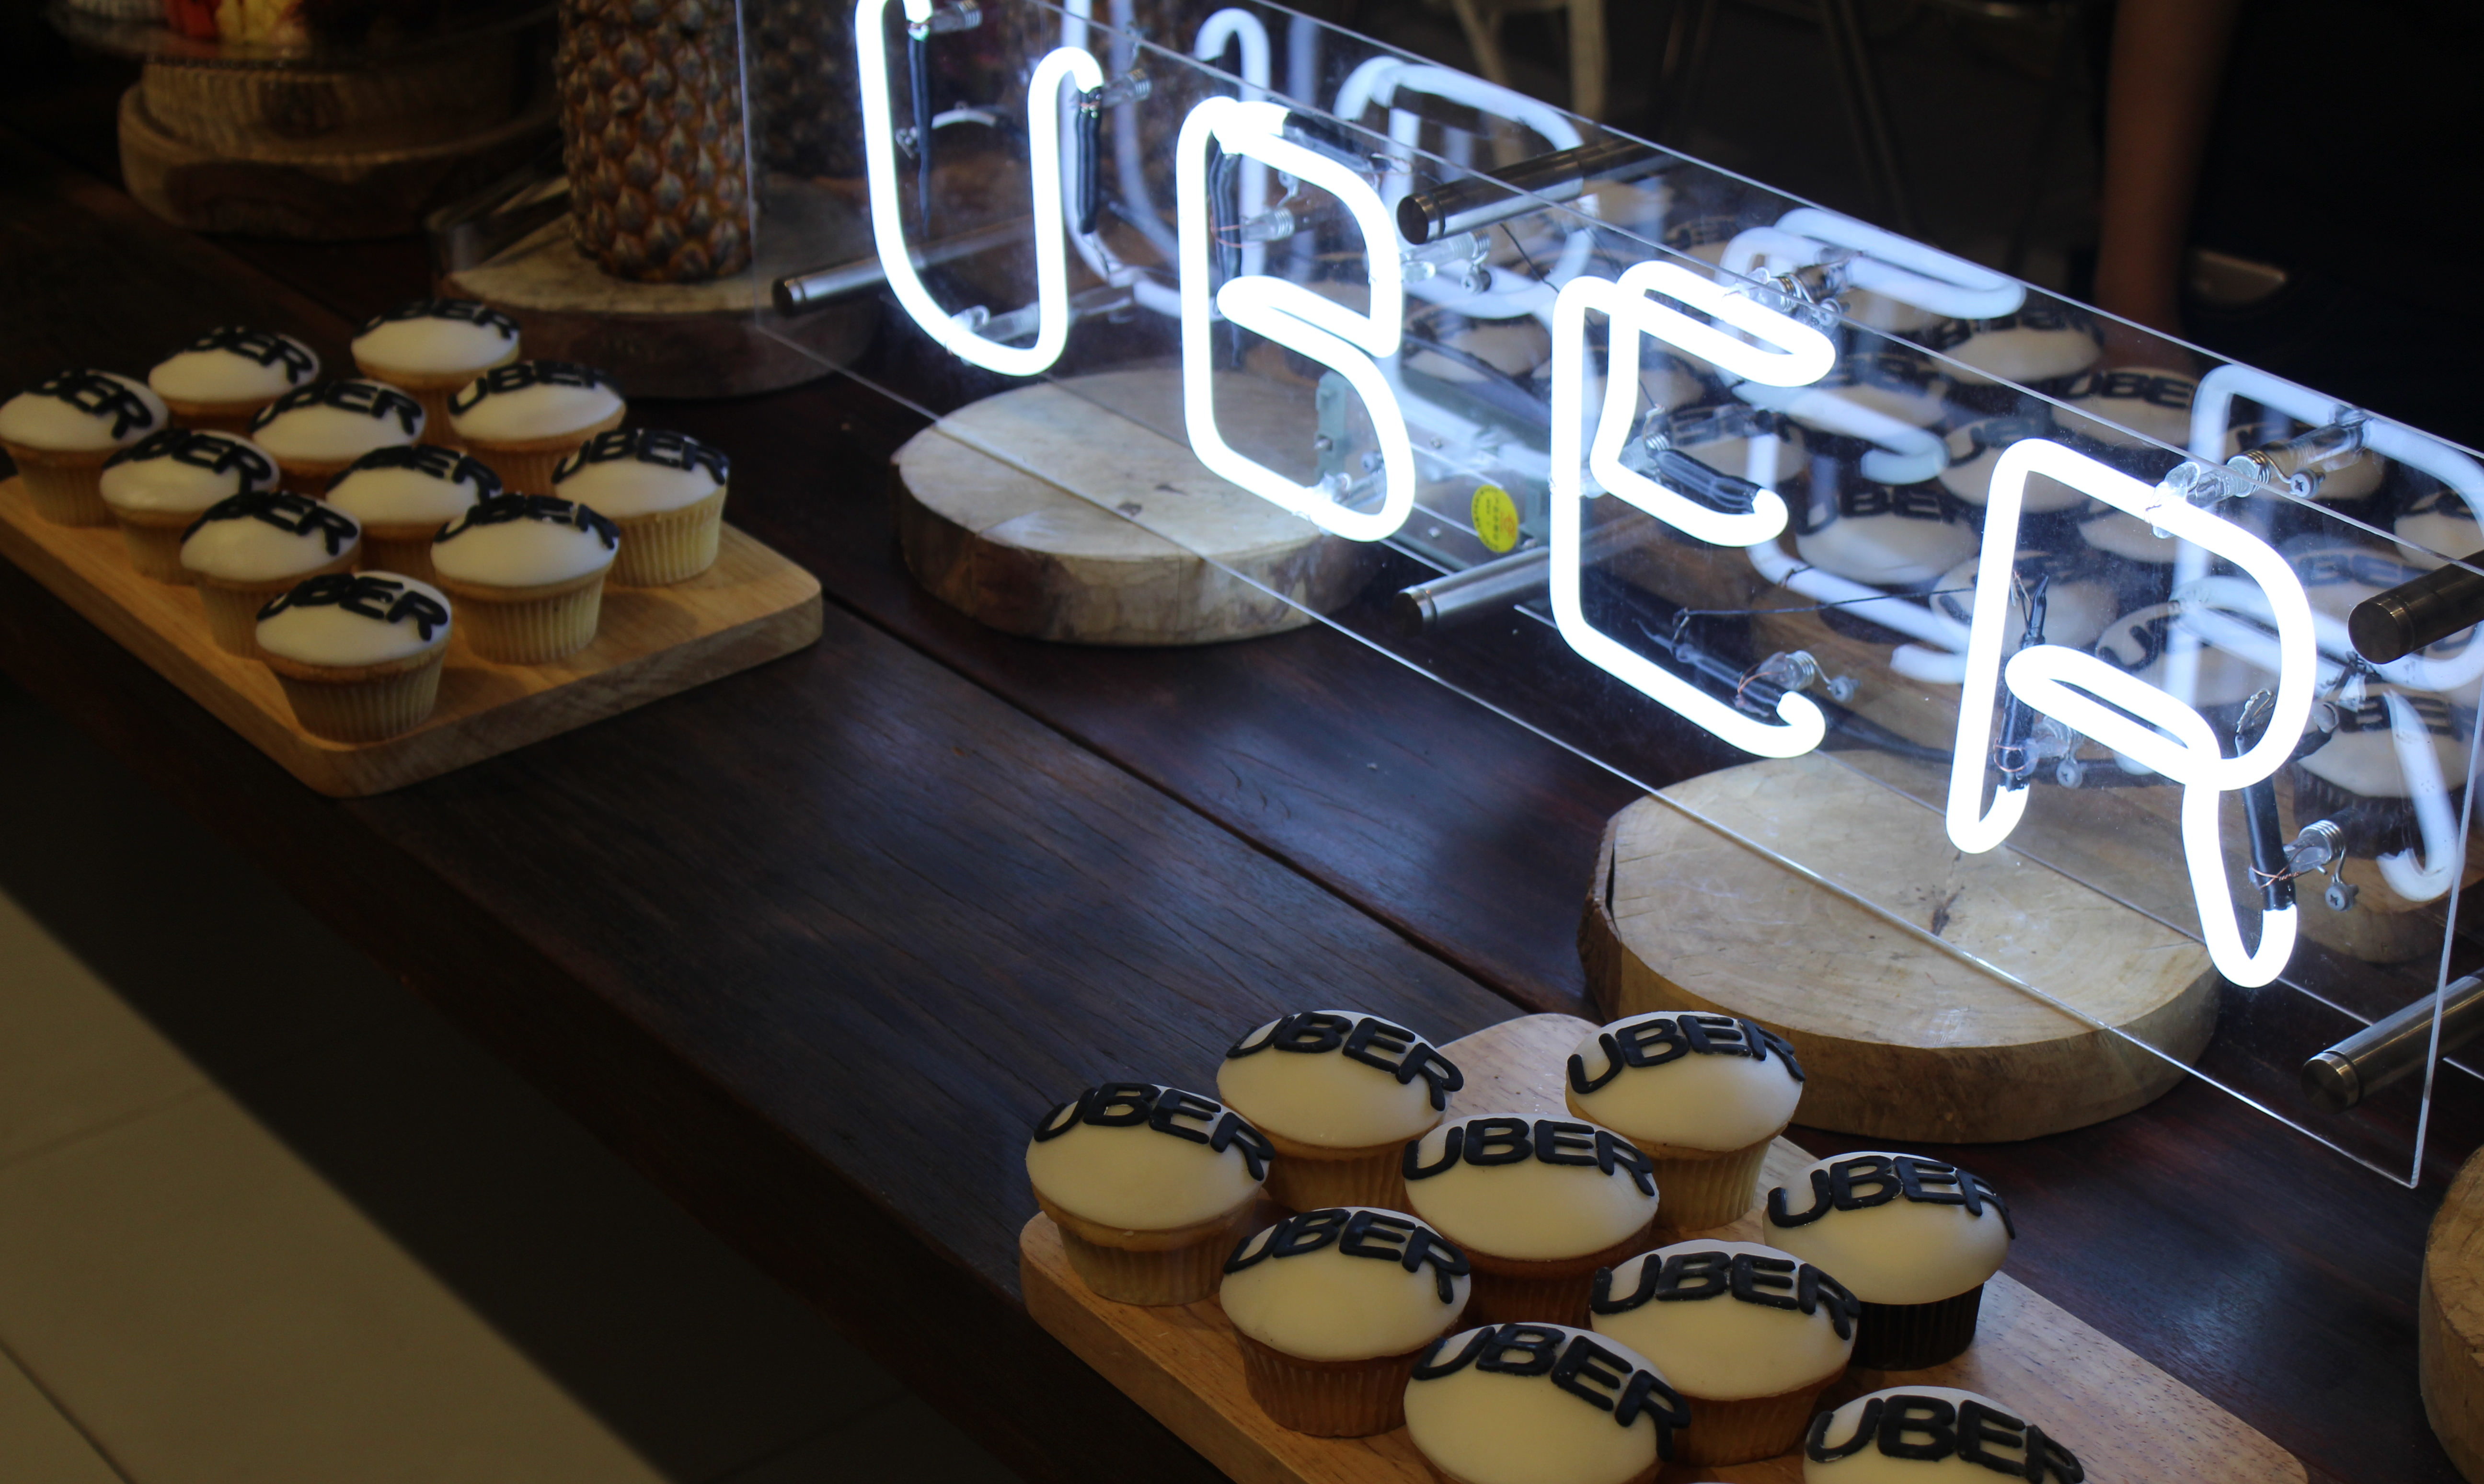 Cupcakes served at Uber’s launch event in Yangon on May 10, 2017. Photo: Jacob Goldberg